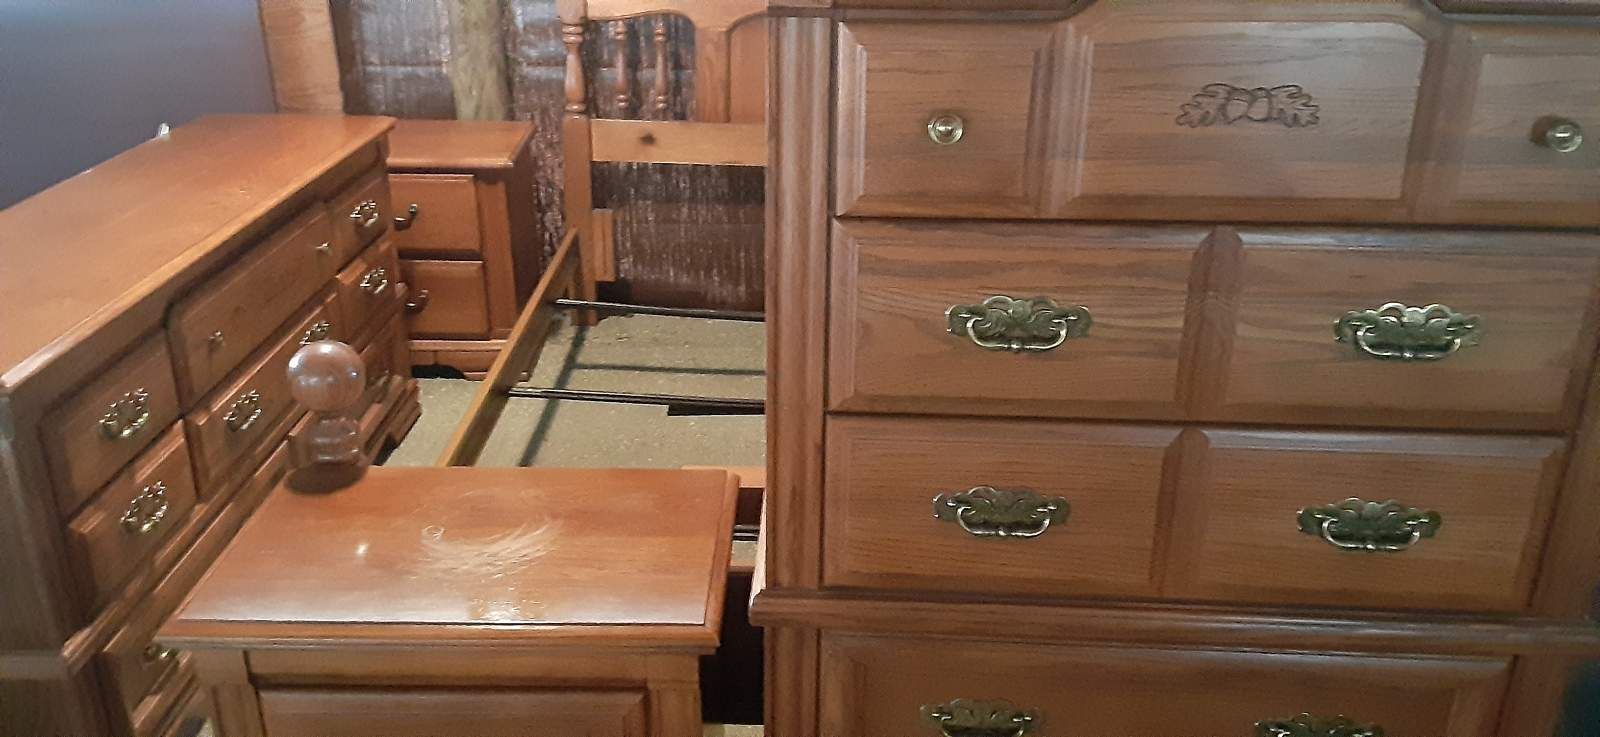 5pc SolidWood Queen Size Broyhill BedroomSet All Like New Bed Frame Chest 2 Nightstands Dresser n Mirror